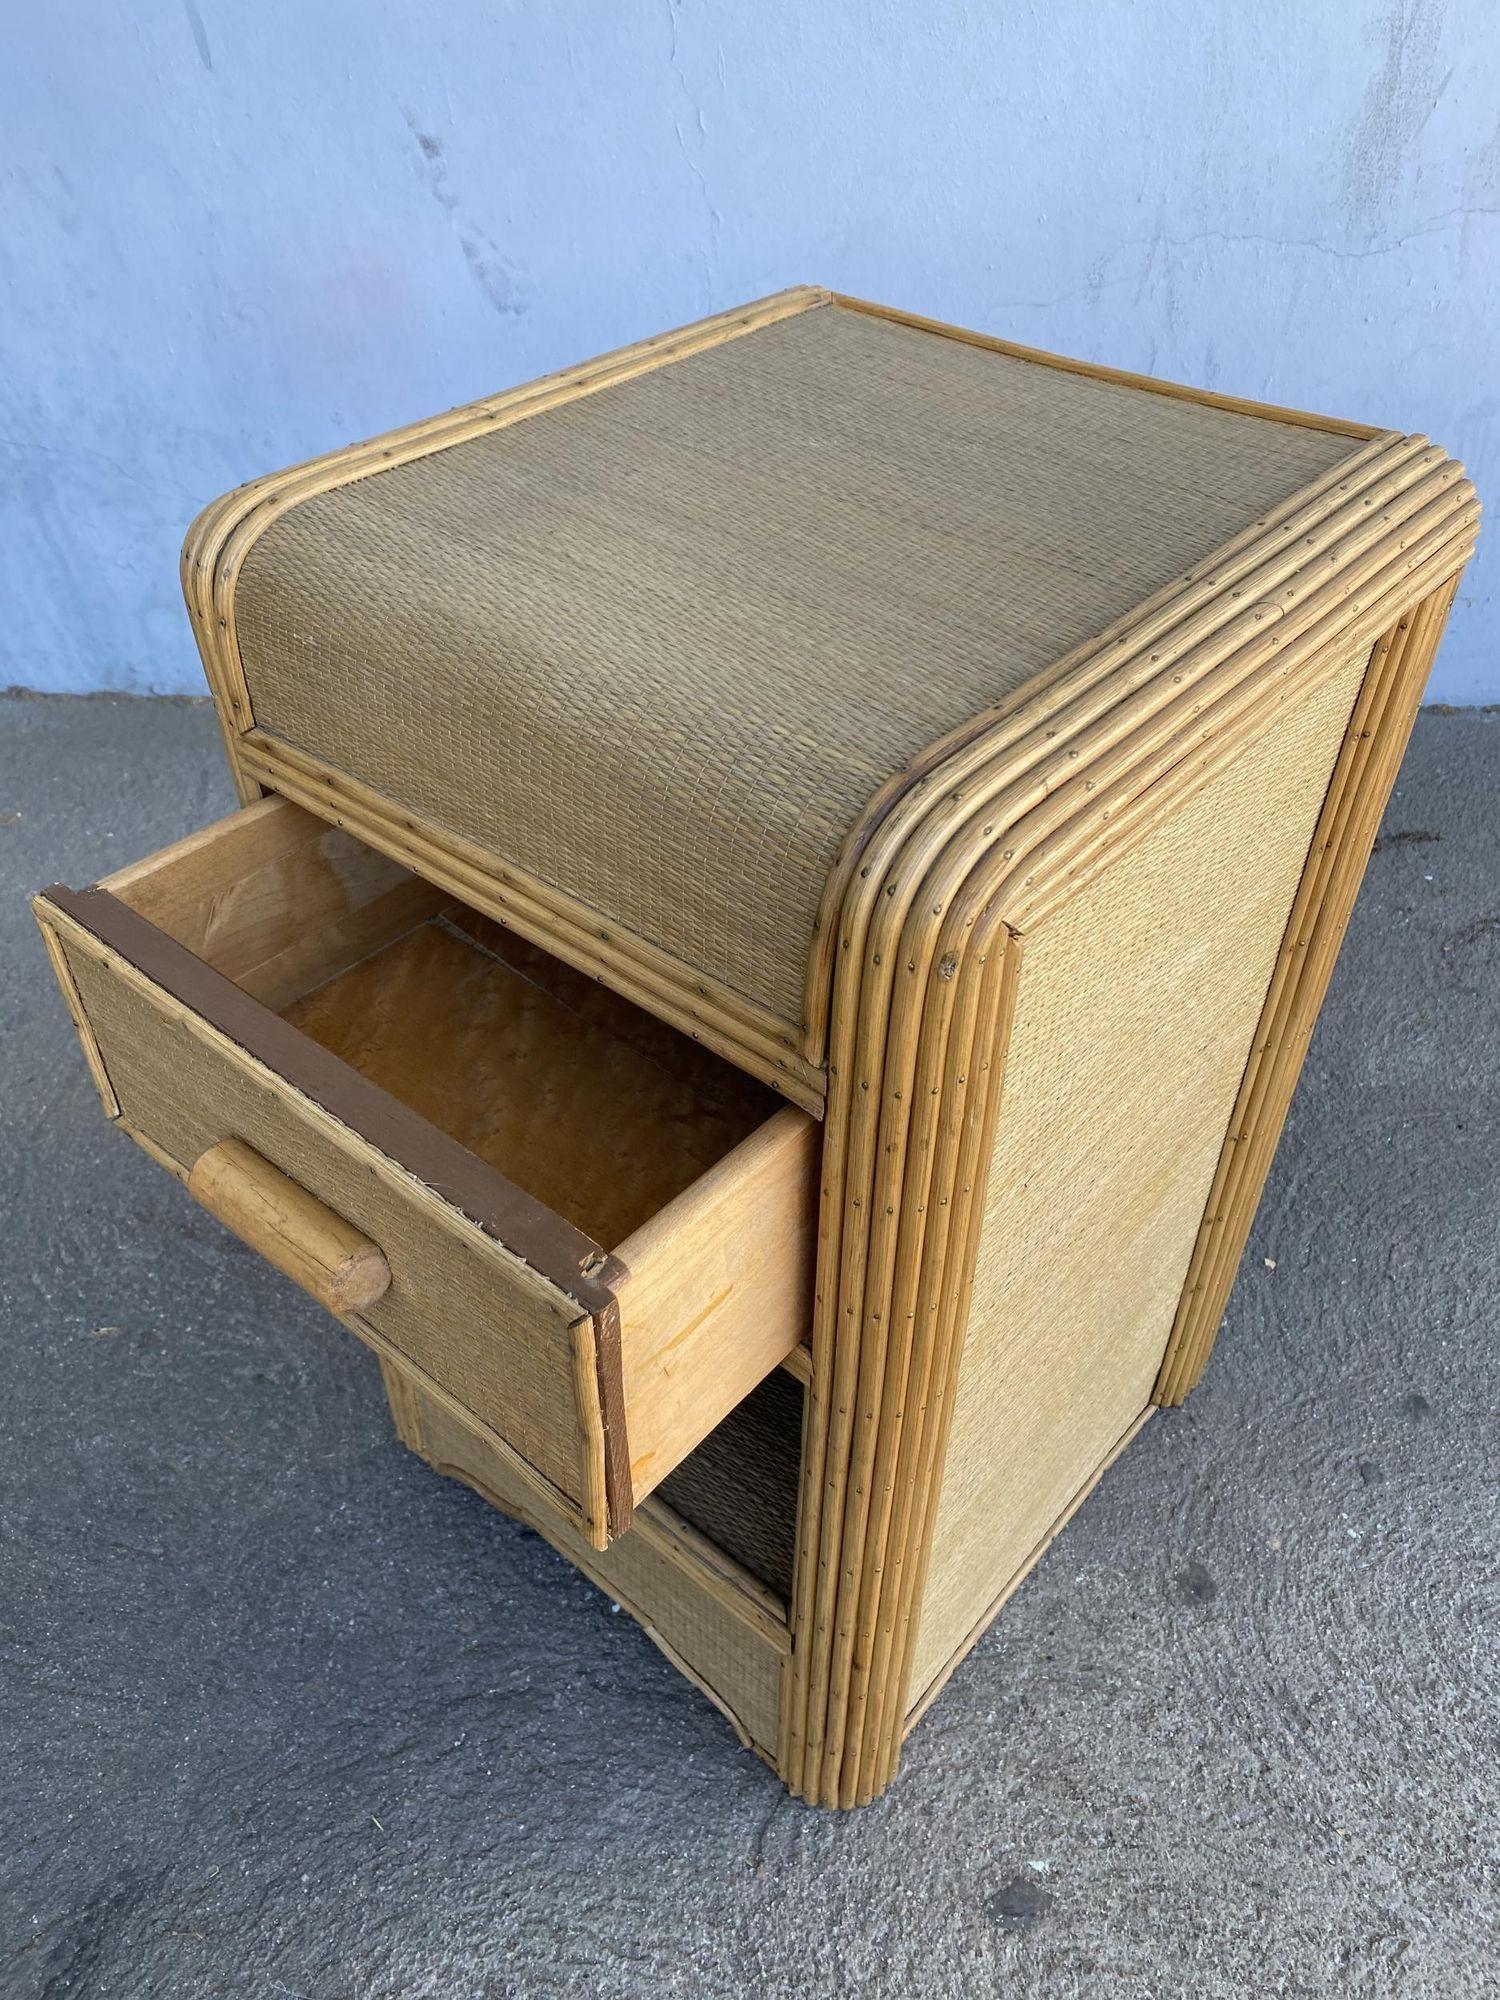 Restored Streamline Stick Reed Rattan Bedside Table W/Grass Mat Coverings In Excellent Condition For Sale In Van Nuys, CA